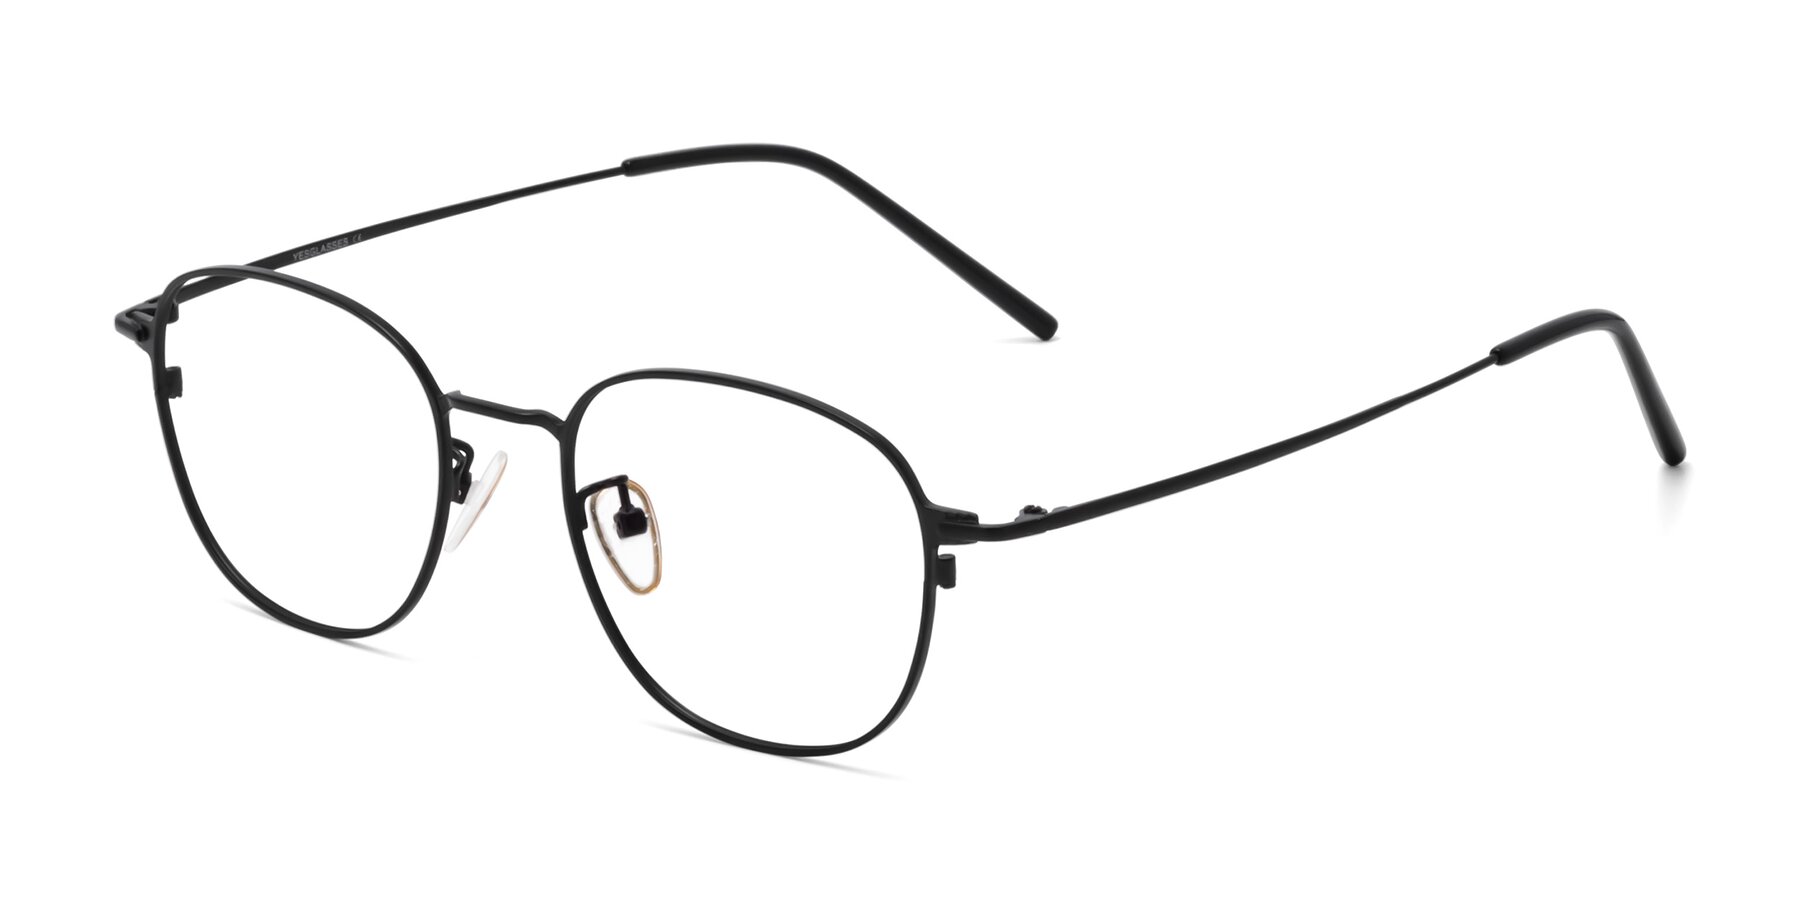 Angle of 18008 in Matte Black with Clear Eyeglass Lenses